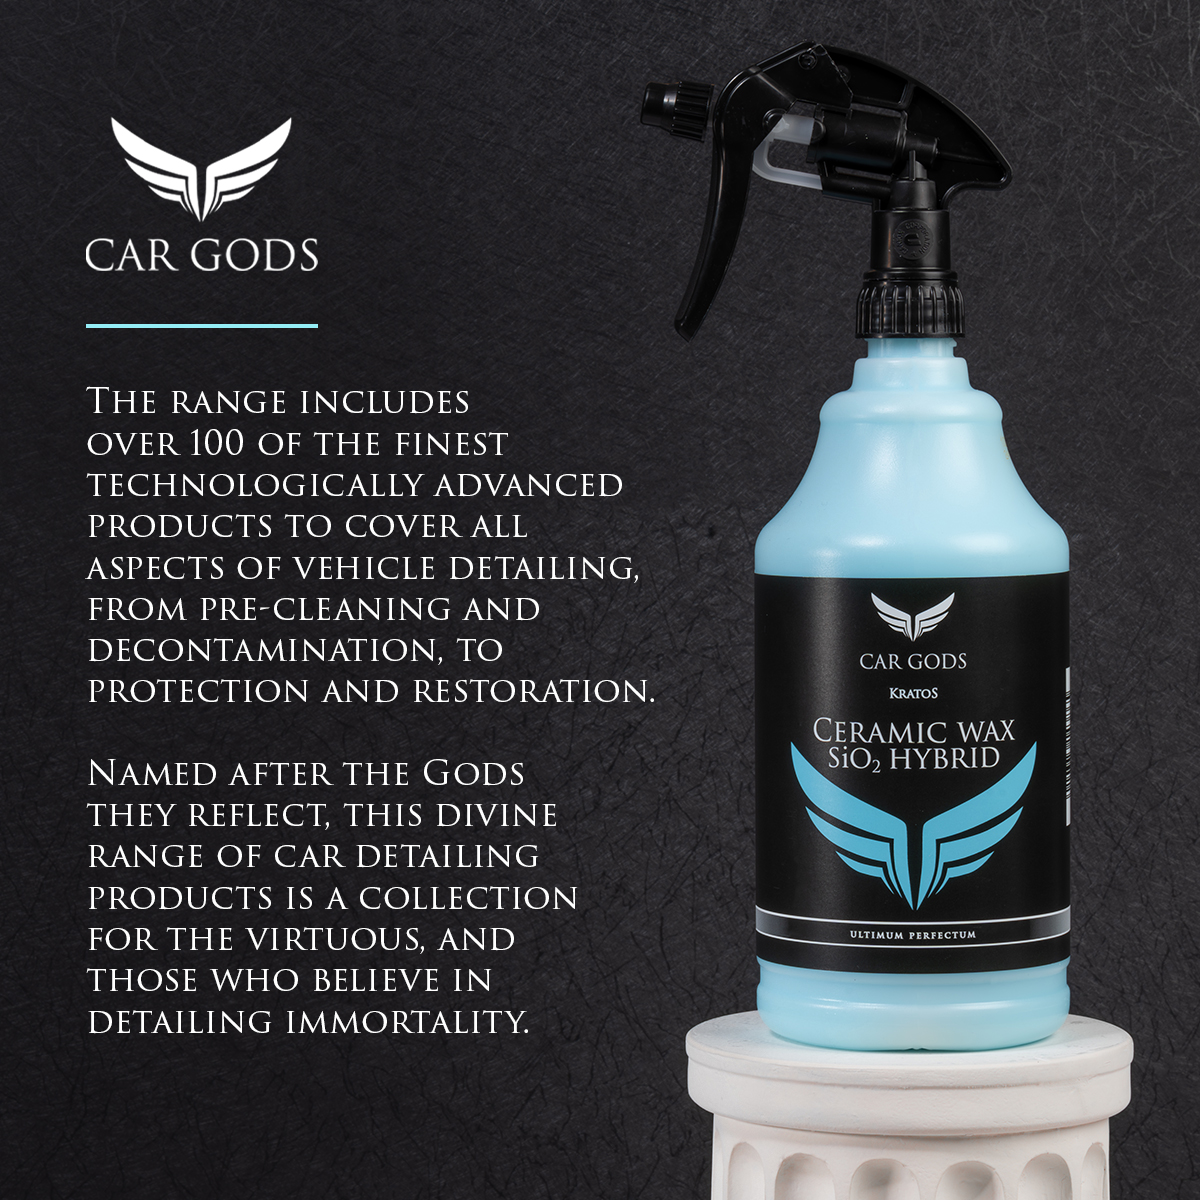 The range includes over 100 of the finest technologically advanced products to cover all aspects of vehicle detailing, from pre-cleaning and decontamination, to protection and restoration. Named after the Gods they reflect, this divine range of car detailing products is a collection for the virtuous, and those who believe in detailing immortality.